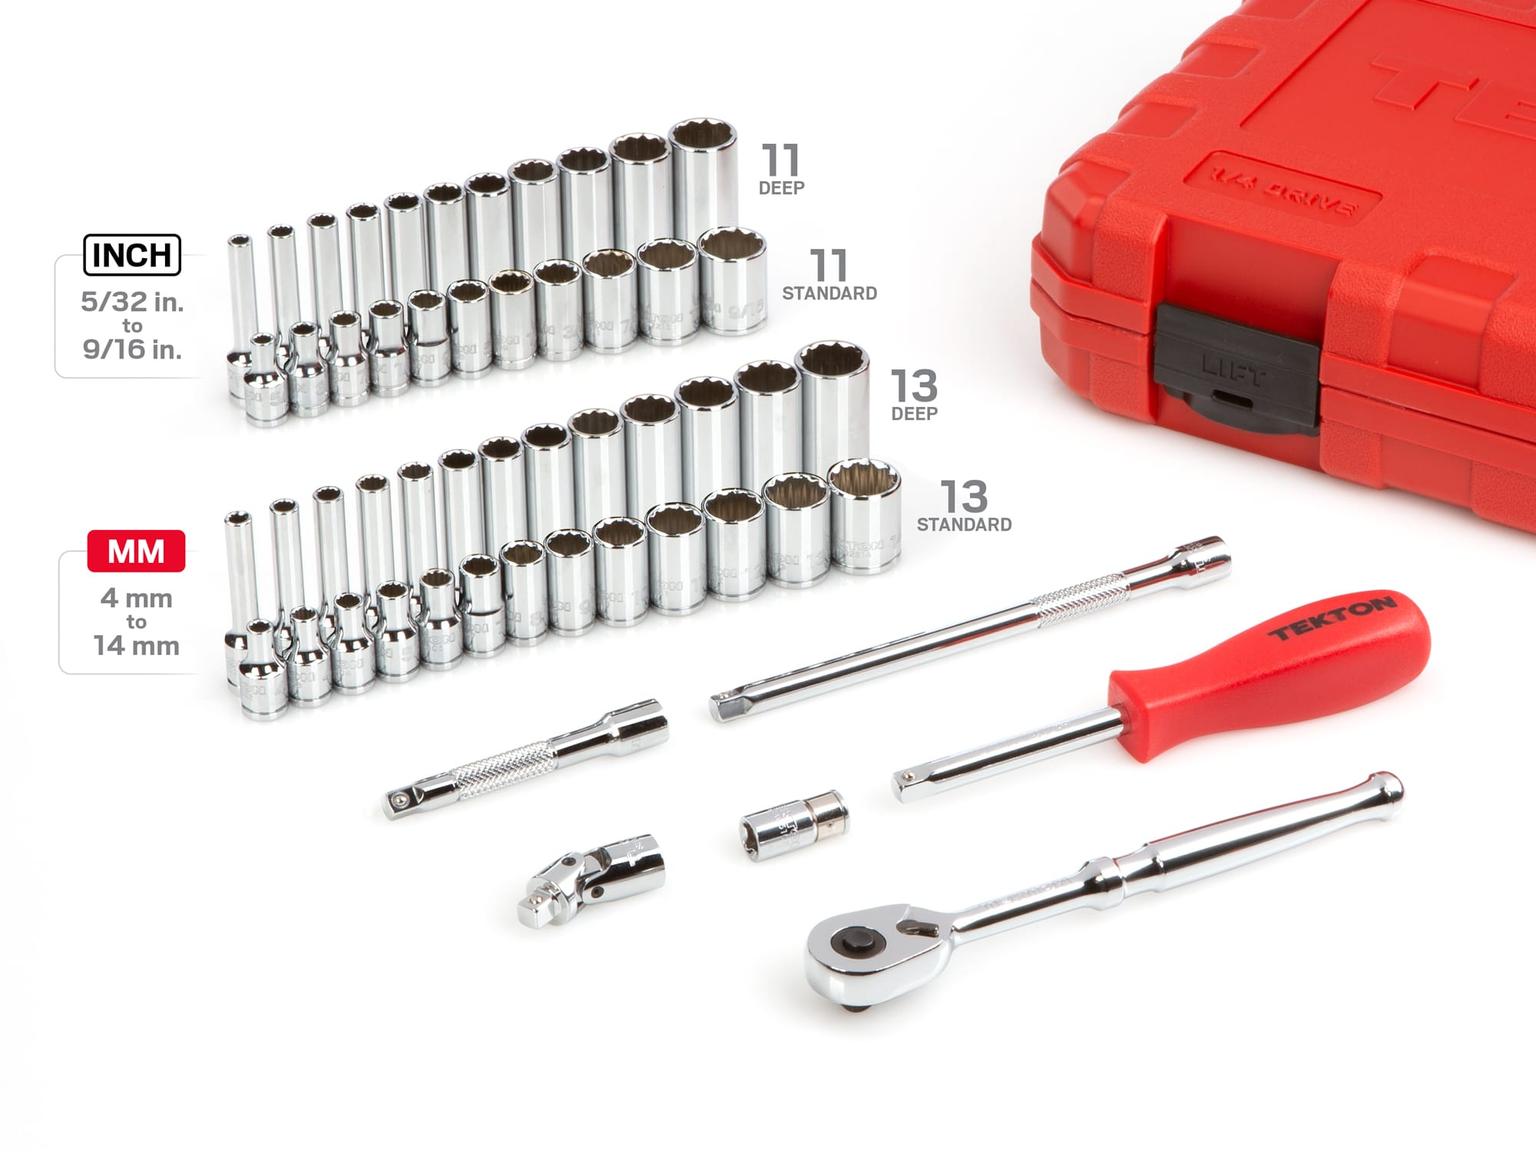 TEKTON SKT05302-D 1/4 Inch Drive 12-Point Socket and Ratchet Set, 55-Piece (5/32-9/16 in., 4-14 mm)